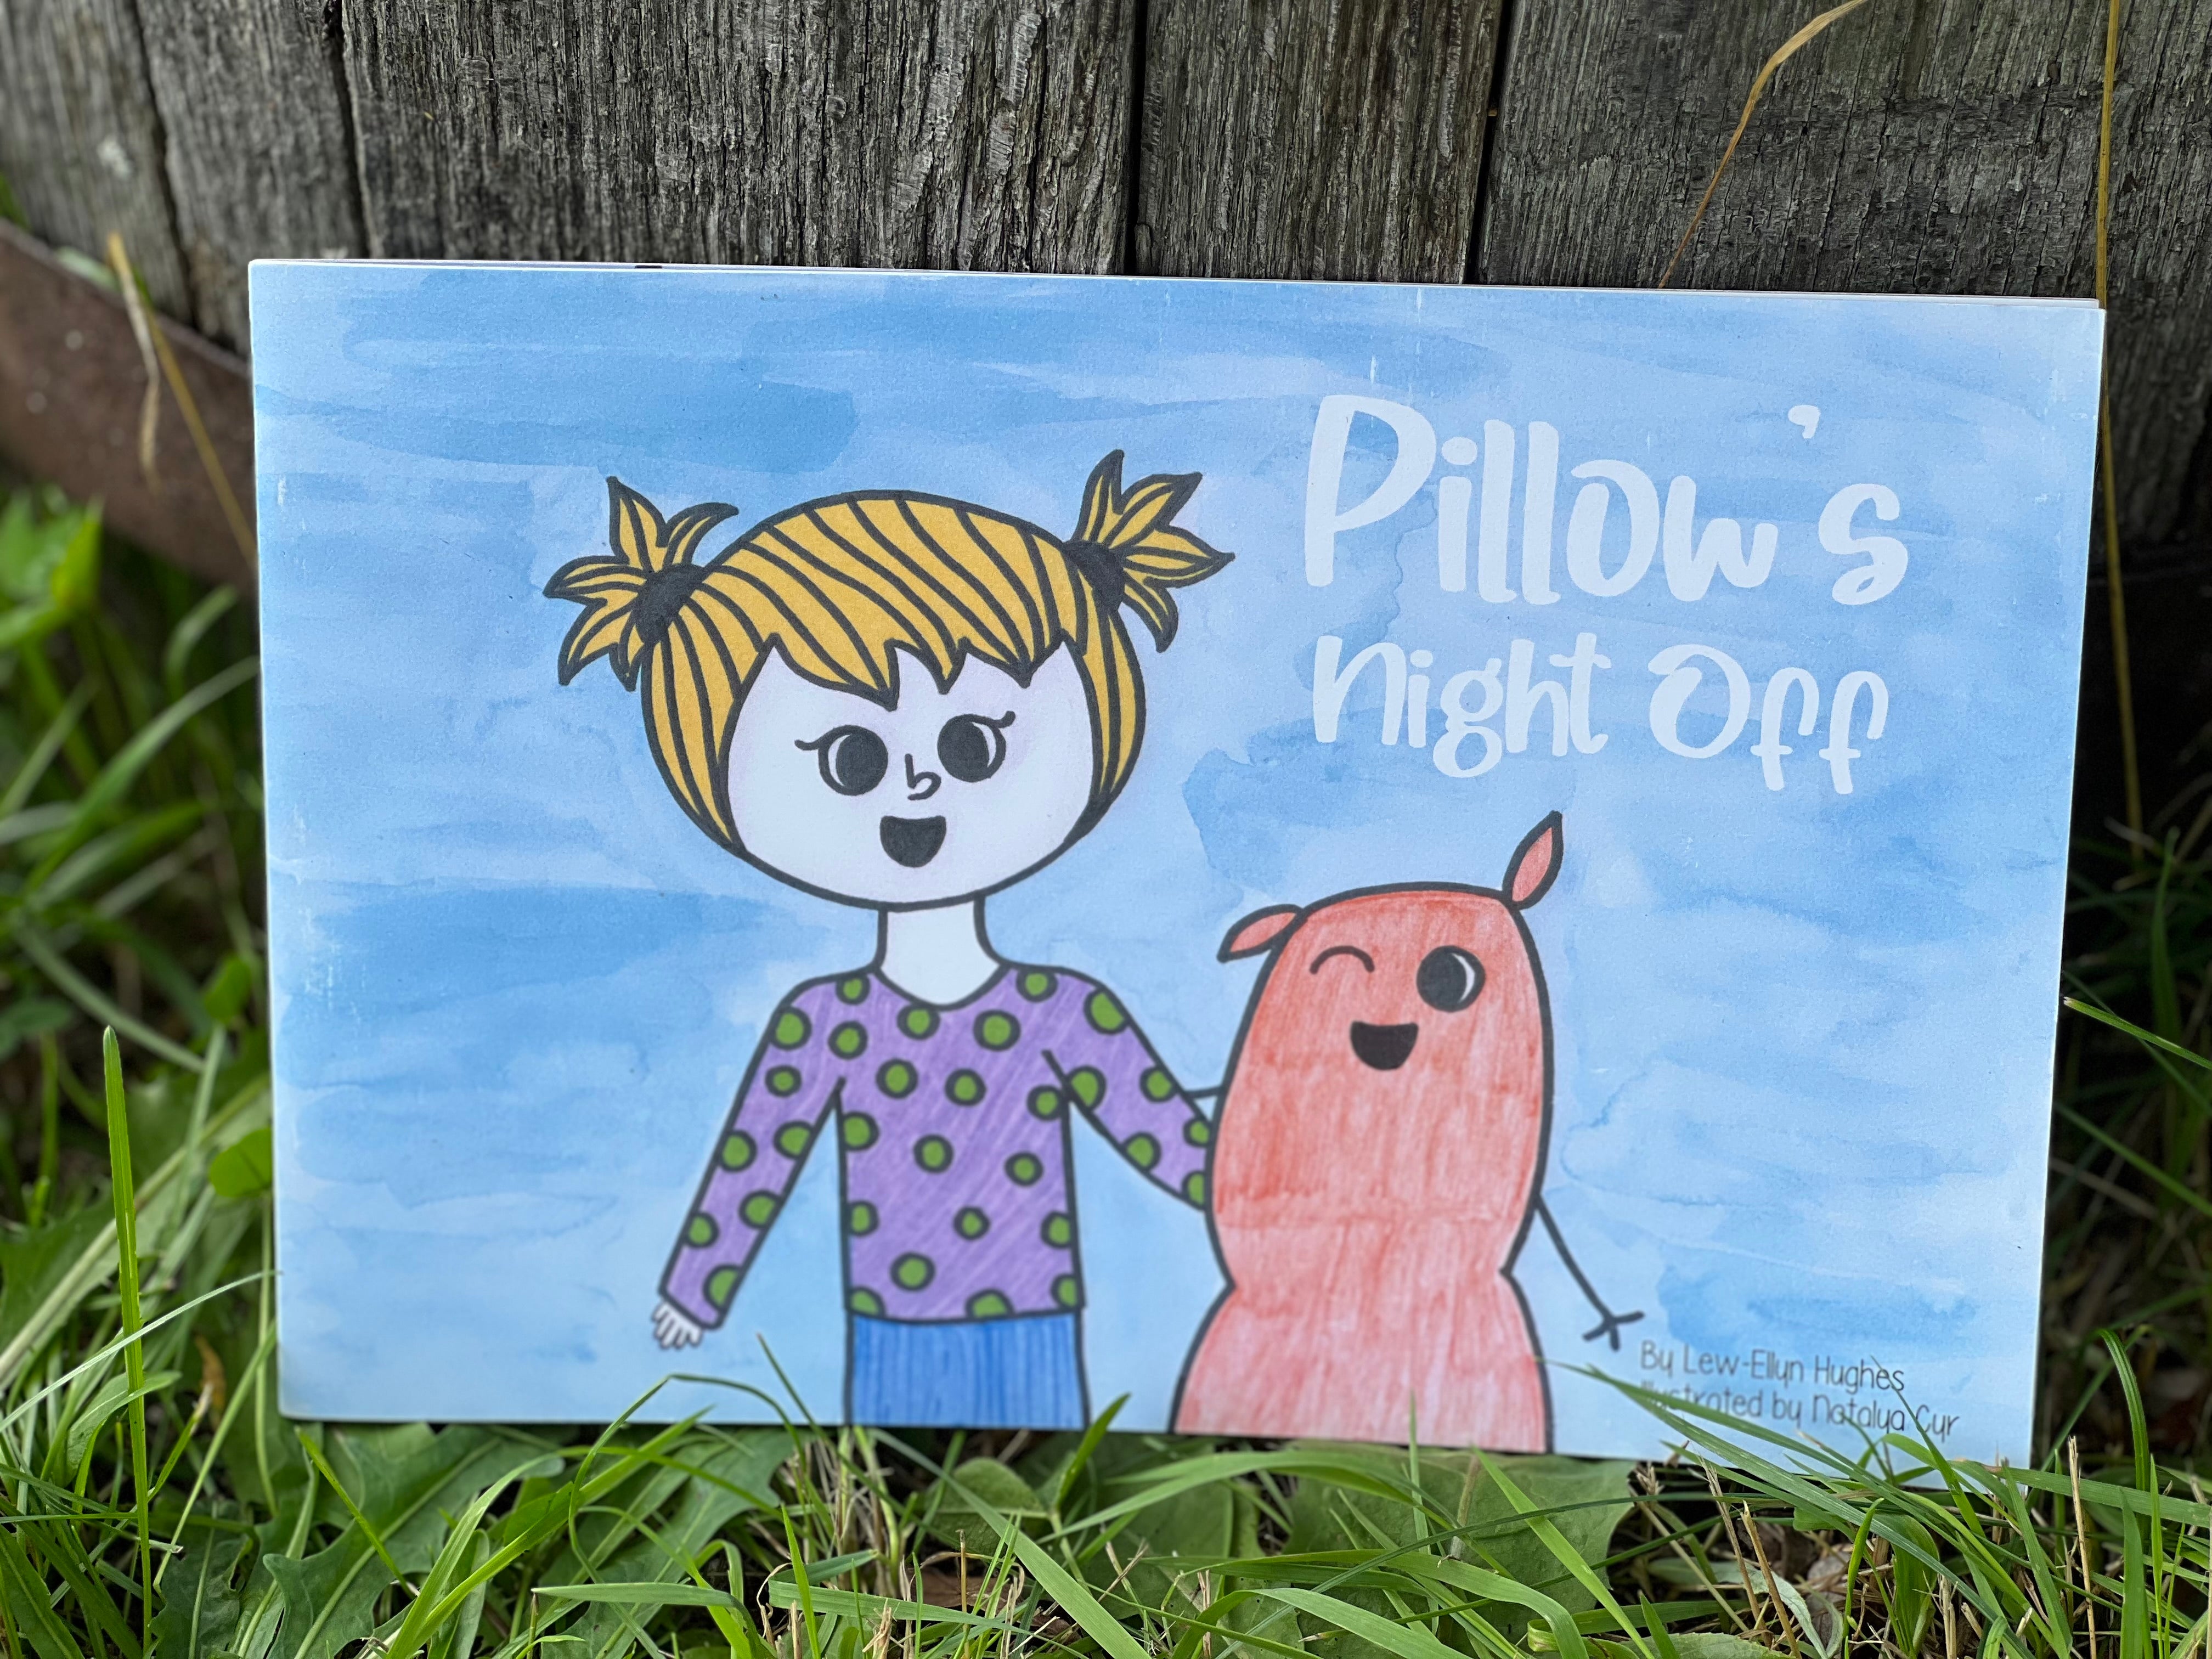 Maine Author PILLOWS NIGHT OFF by Lew-Ellyn Hughes